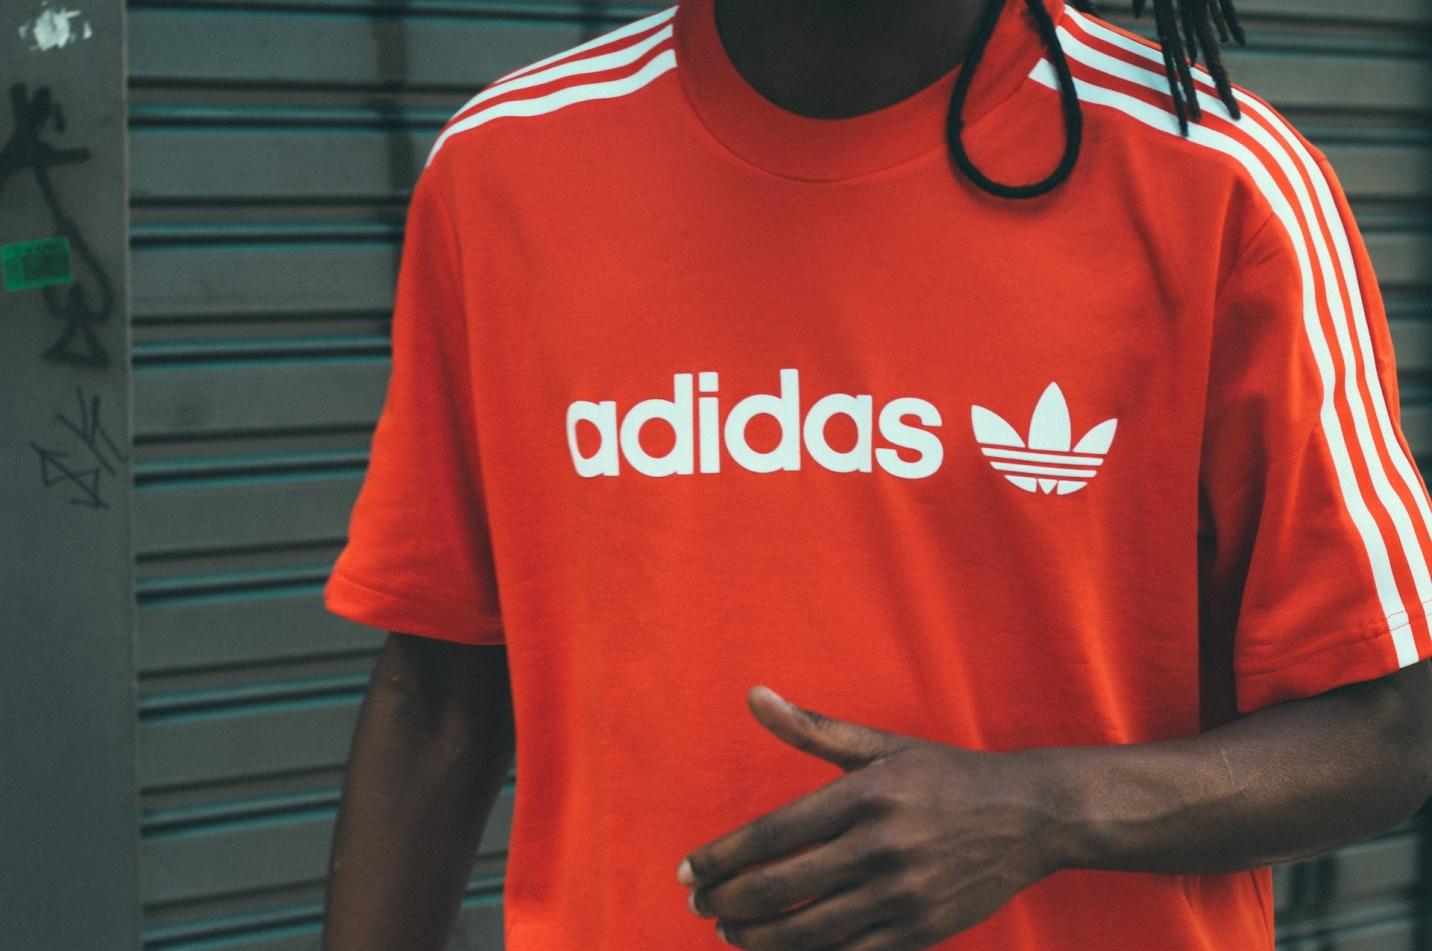 Rediscover 80s Vibes: Adidas Vintage Fashion Guide.